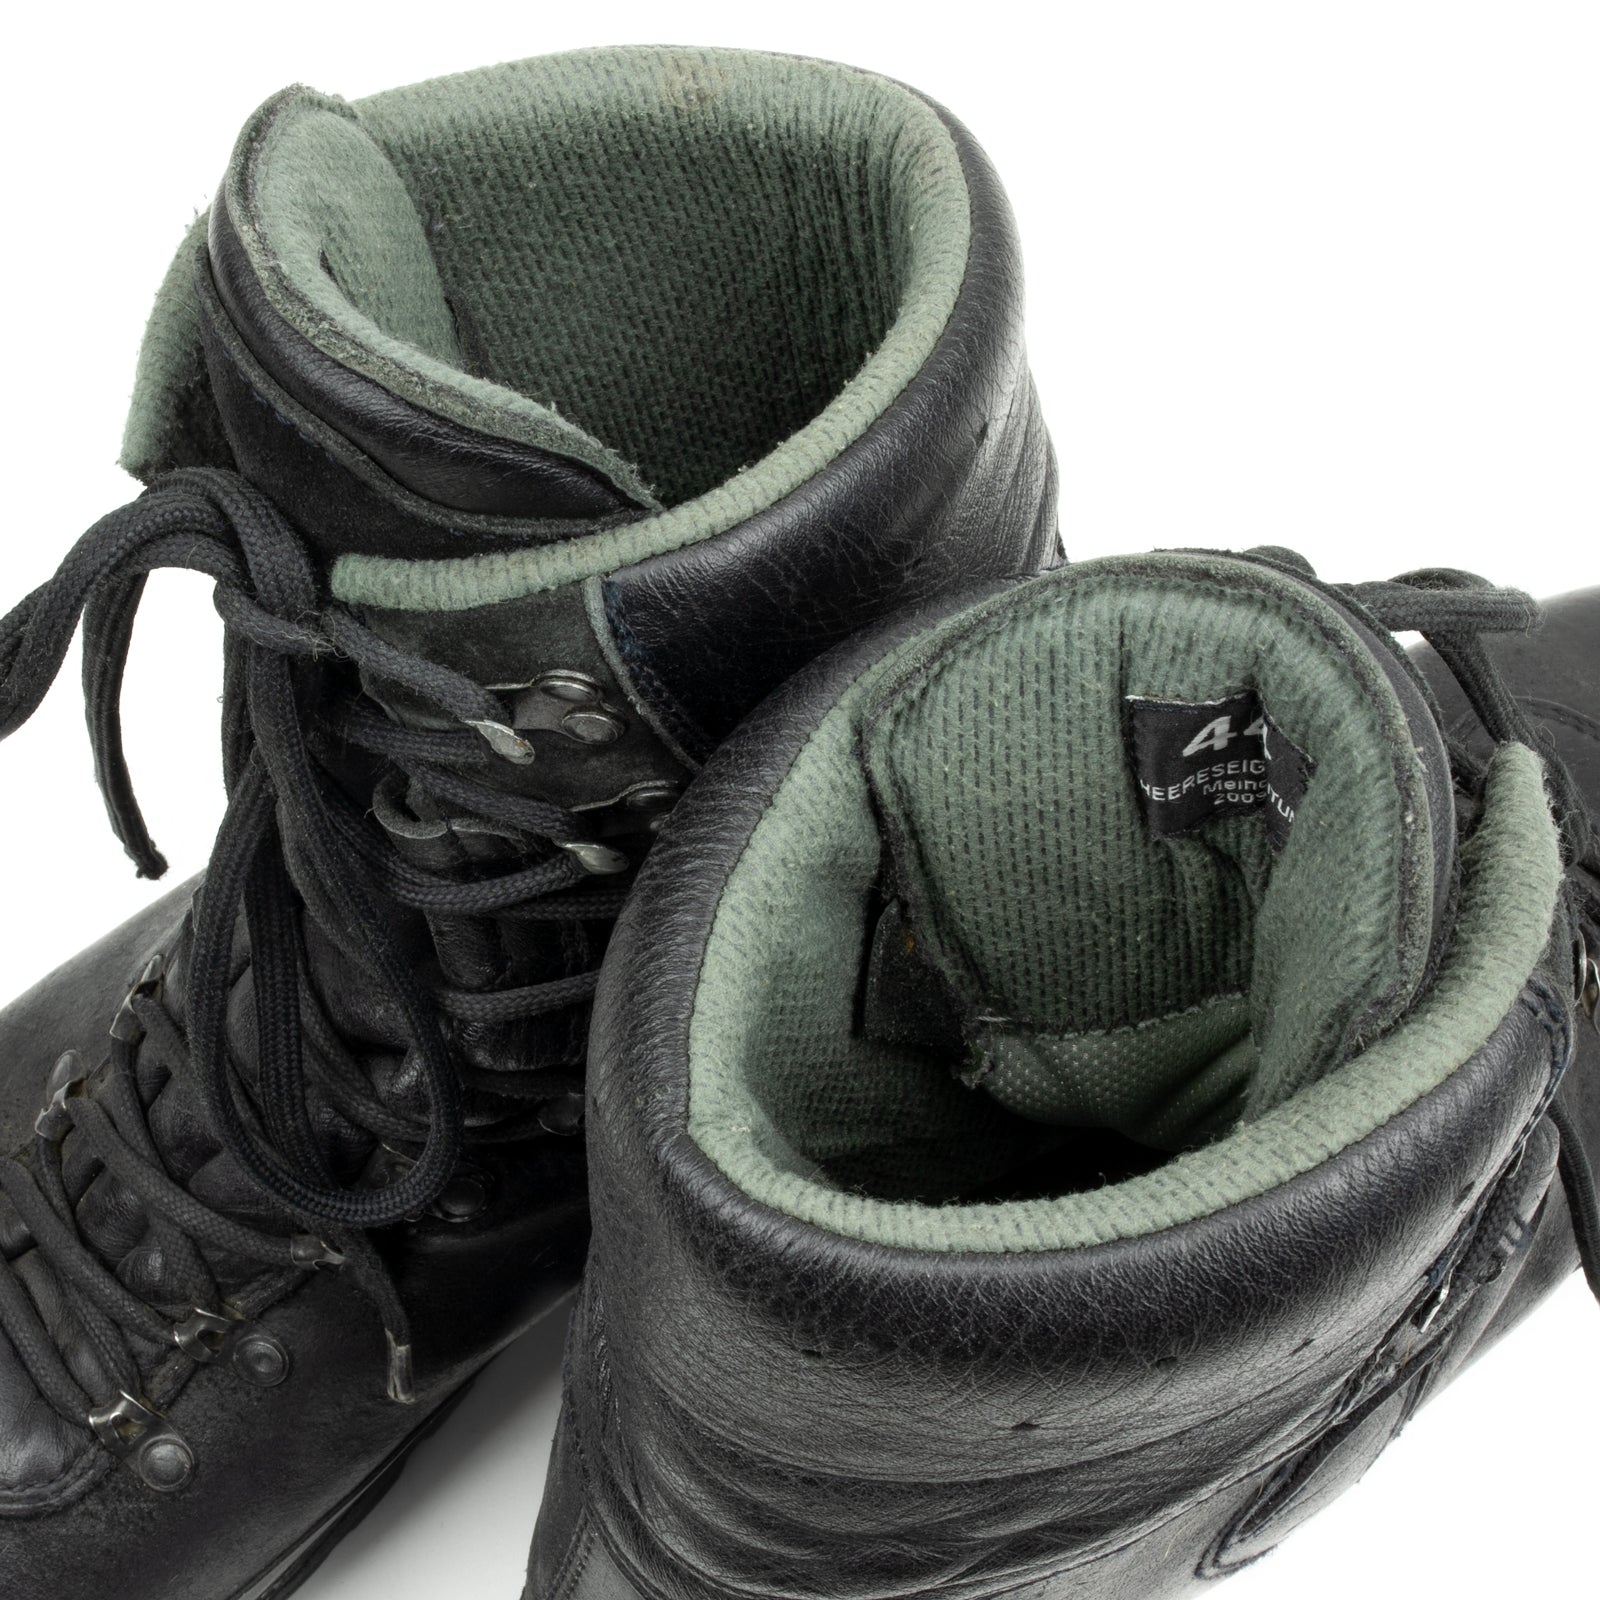 Army Gore-Tex Mountain Boots | Meindl Brand